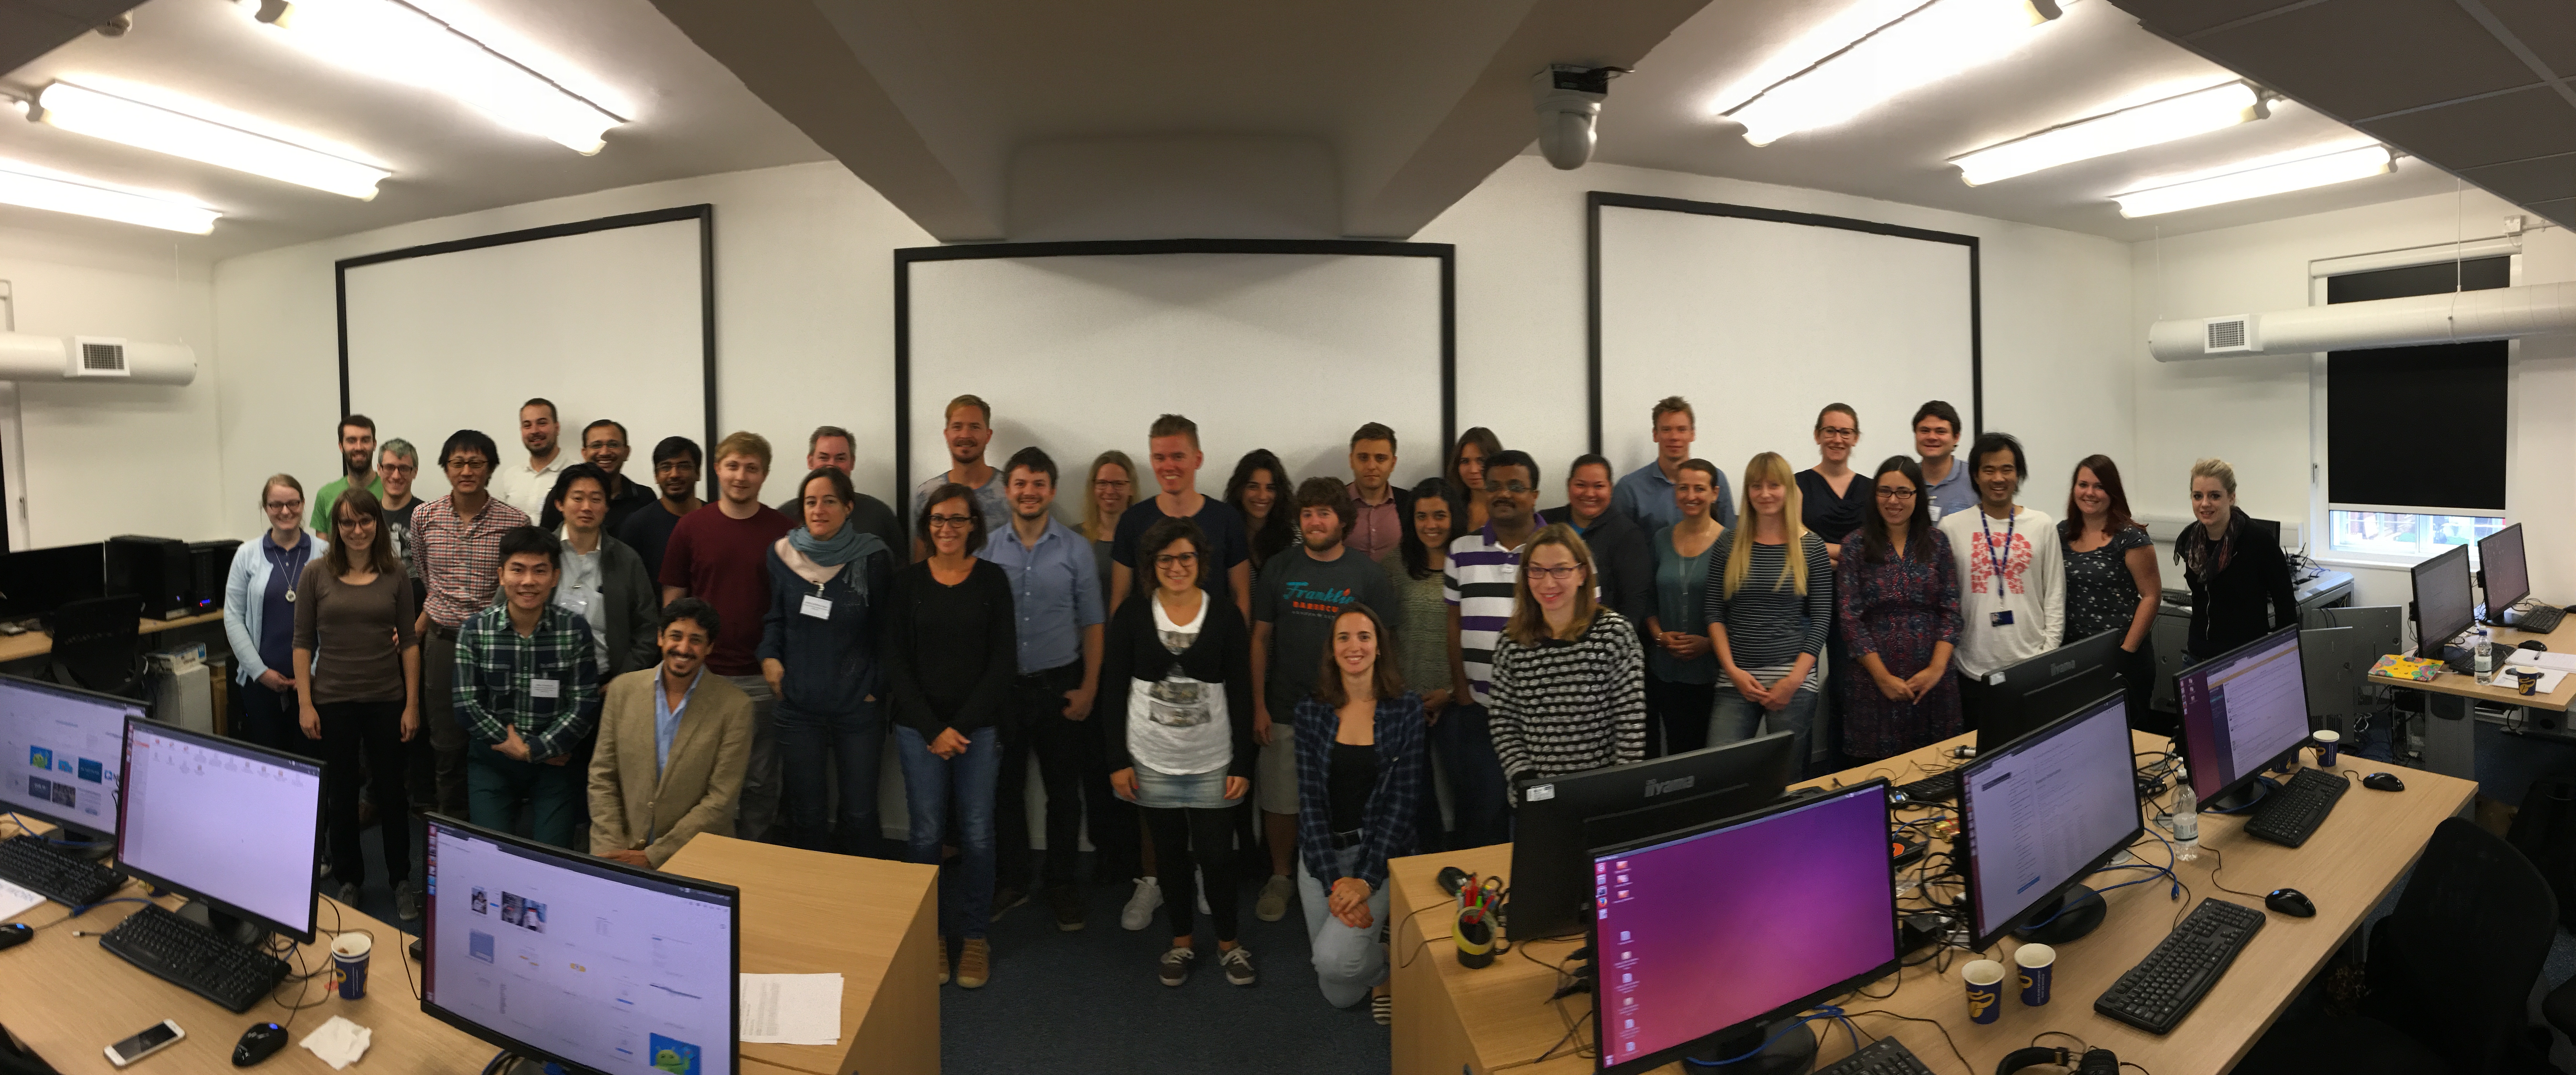 EMBO Course Photo September 2016